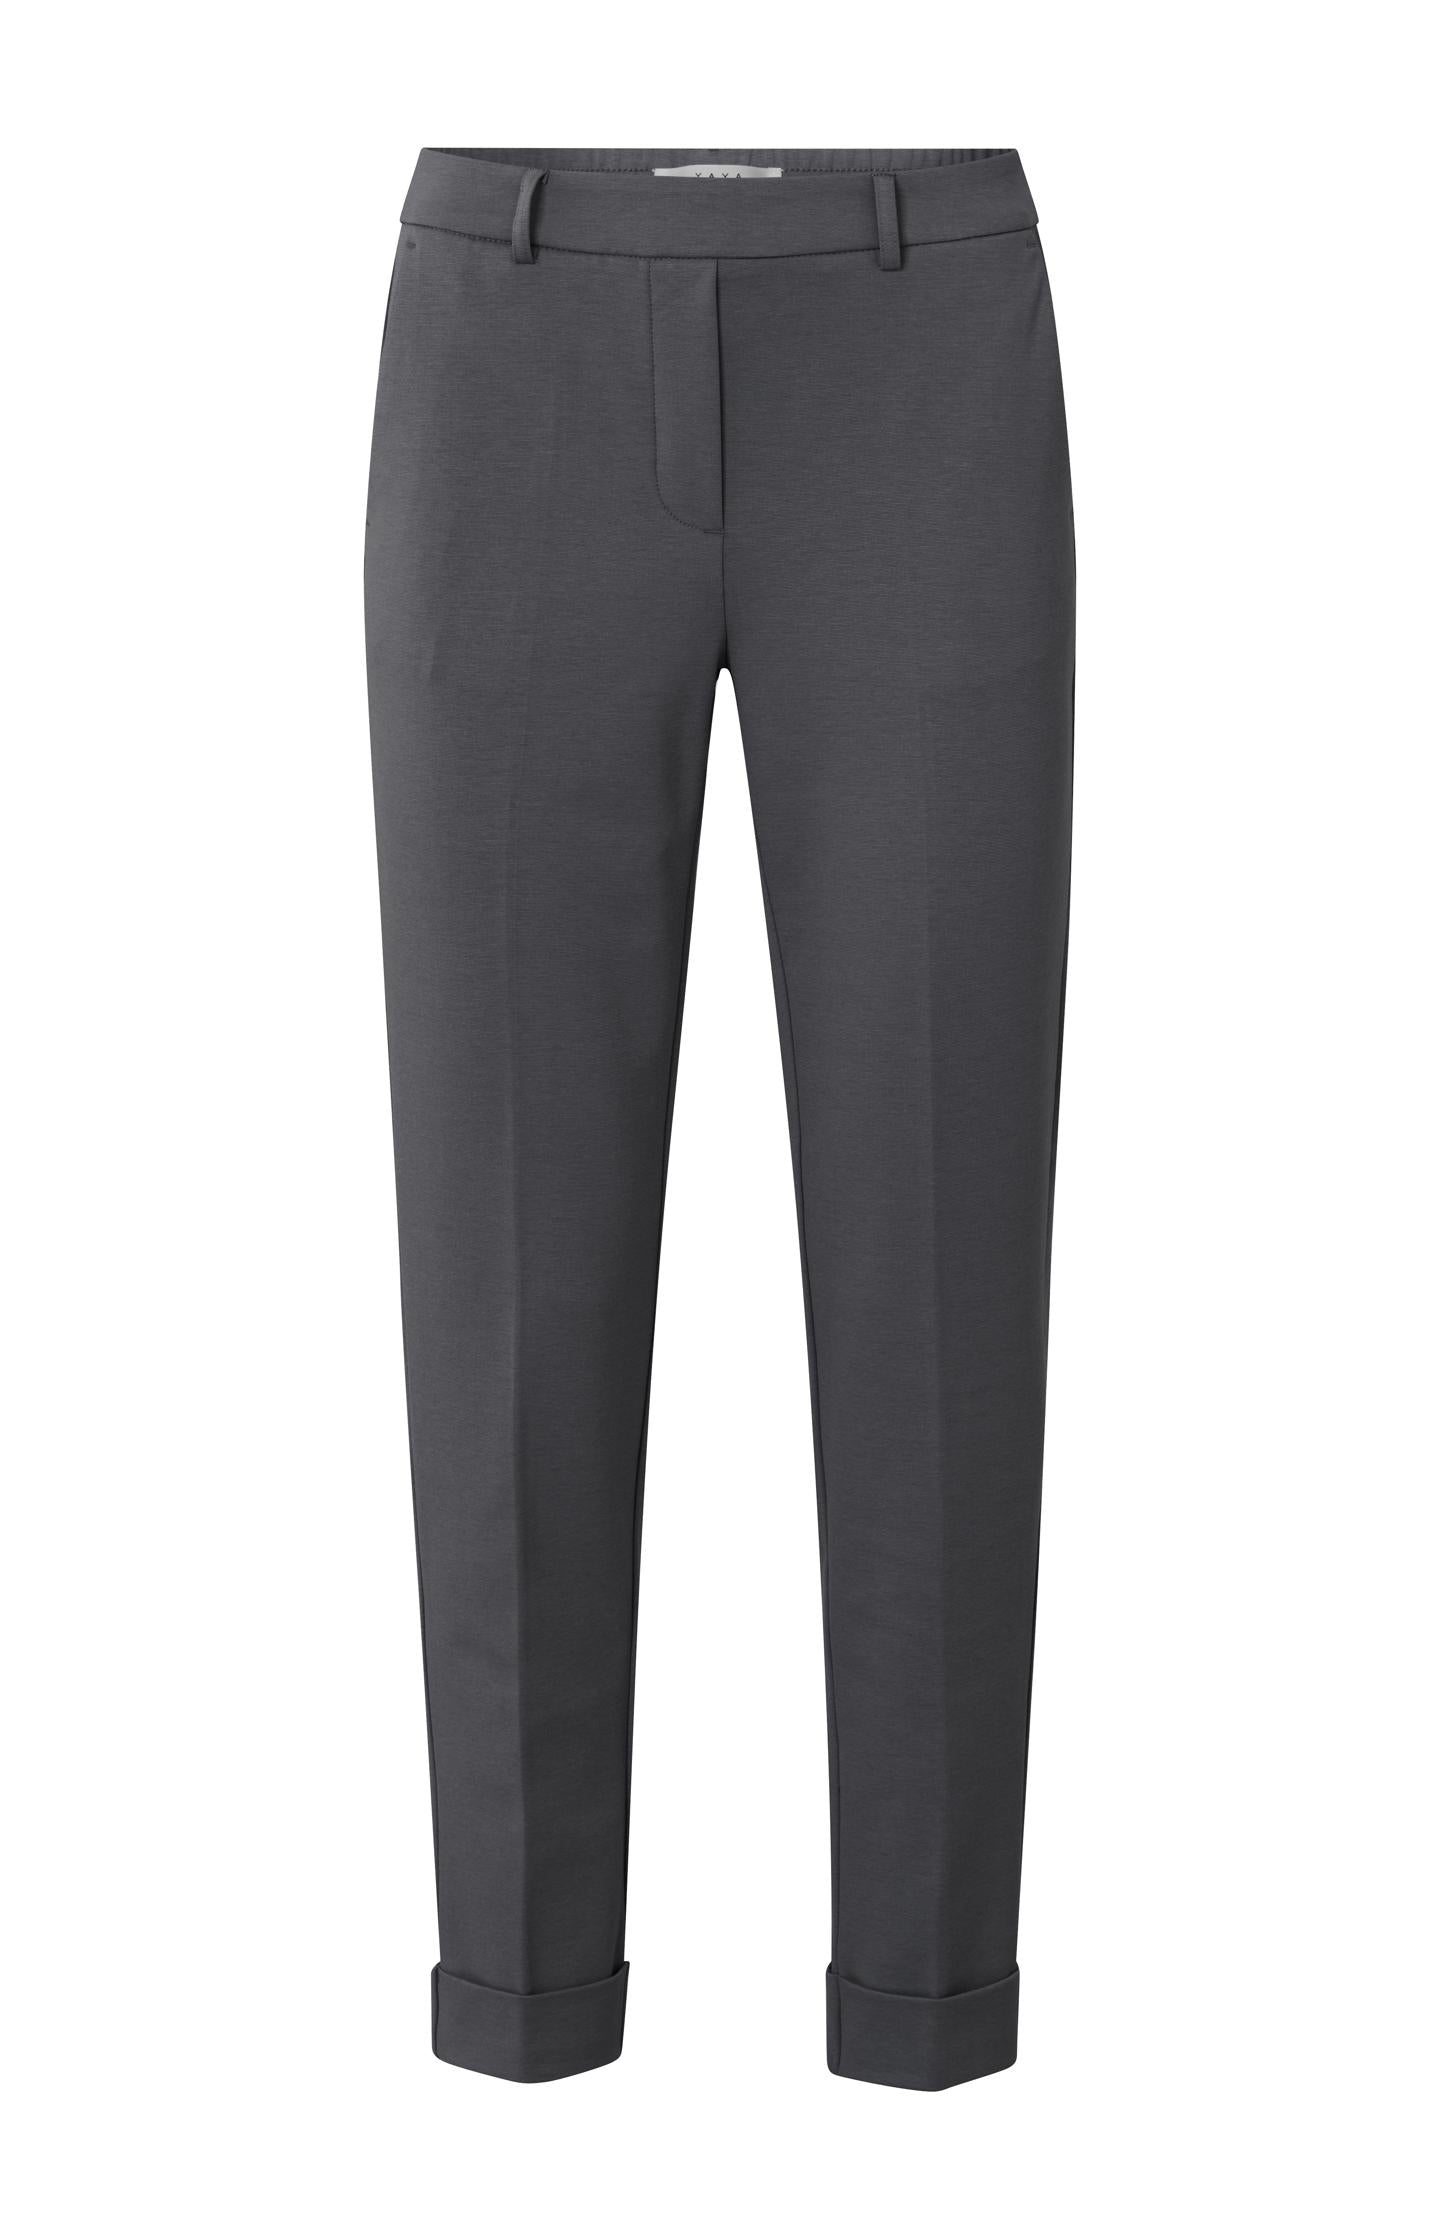 Jersey trousers with straight legs and elastic waistband - Type: product